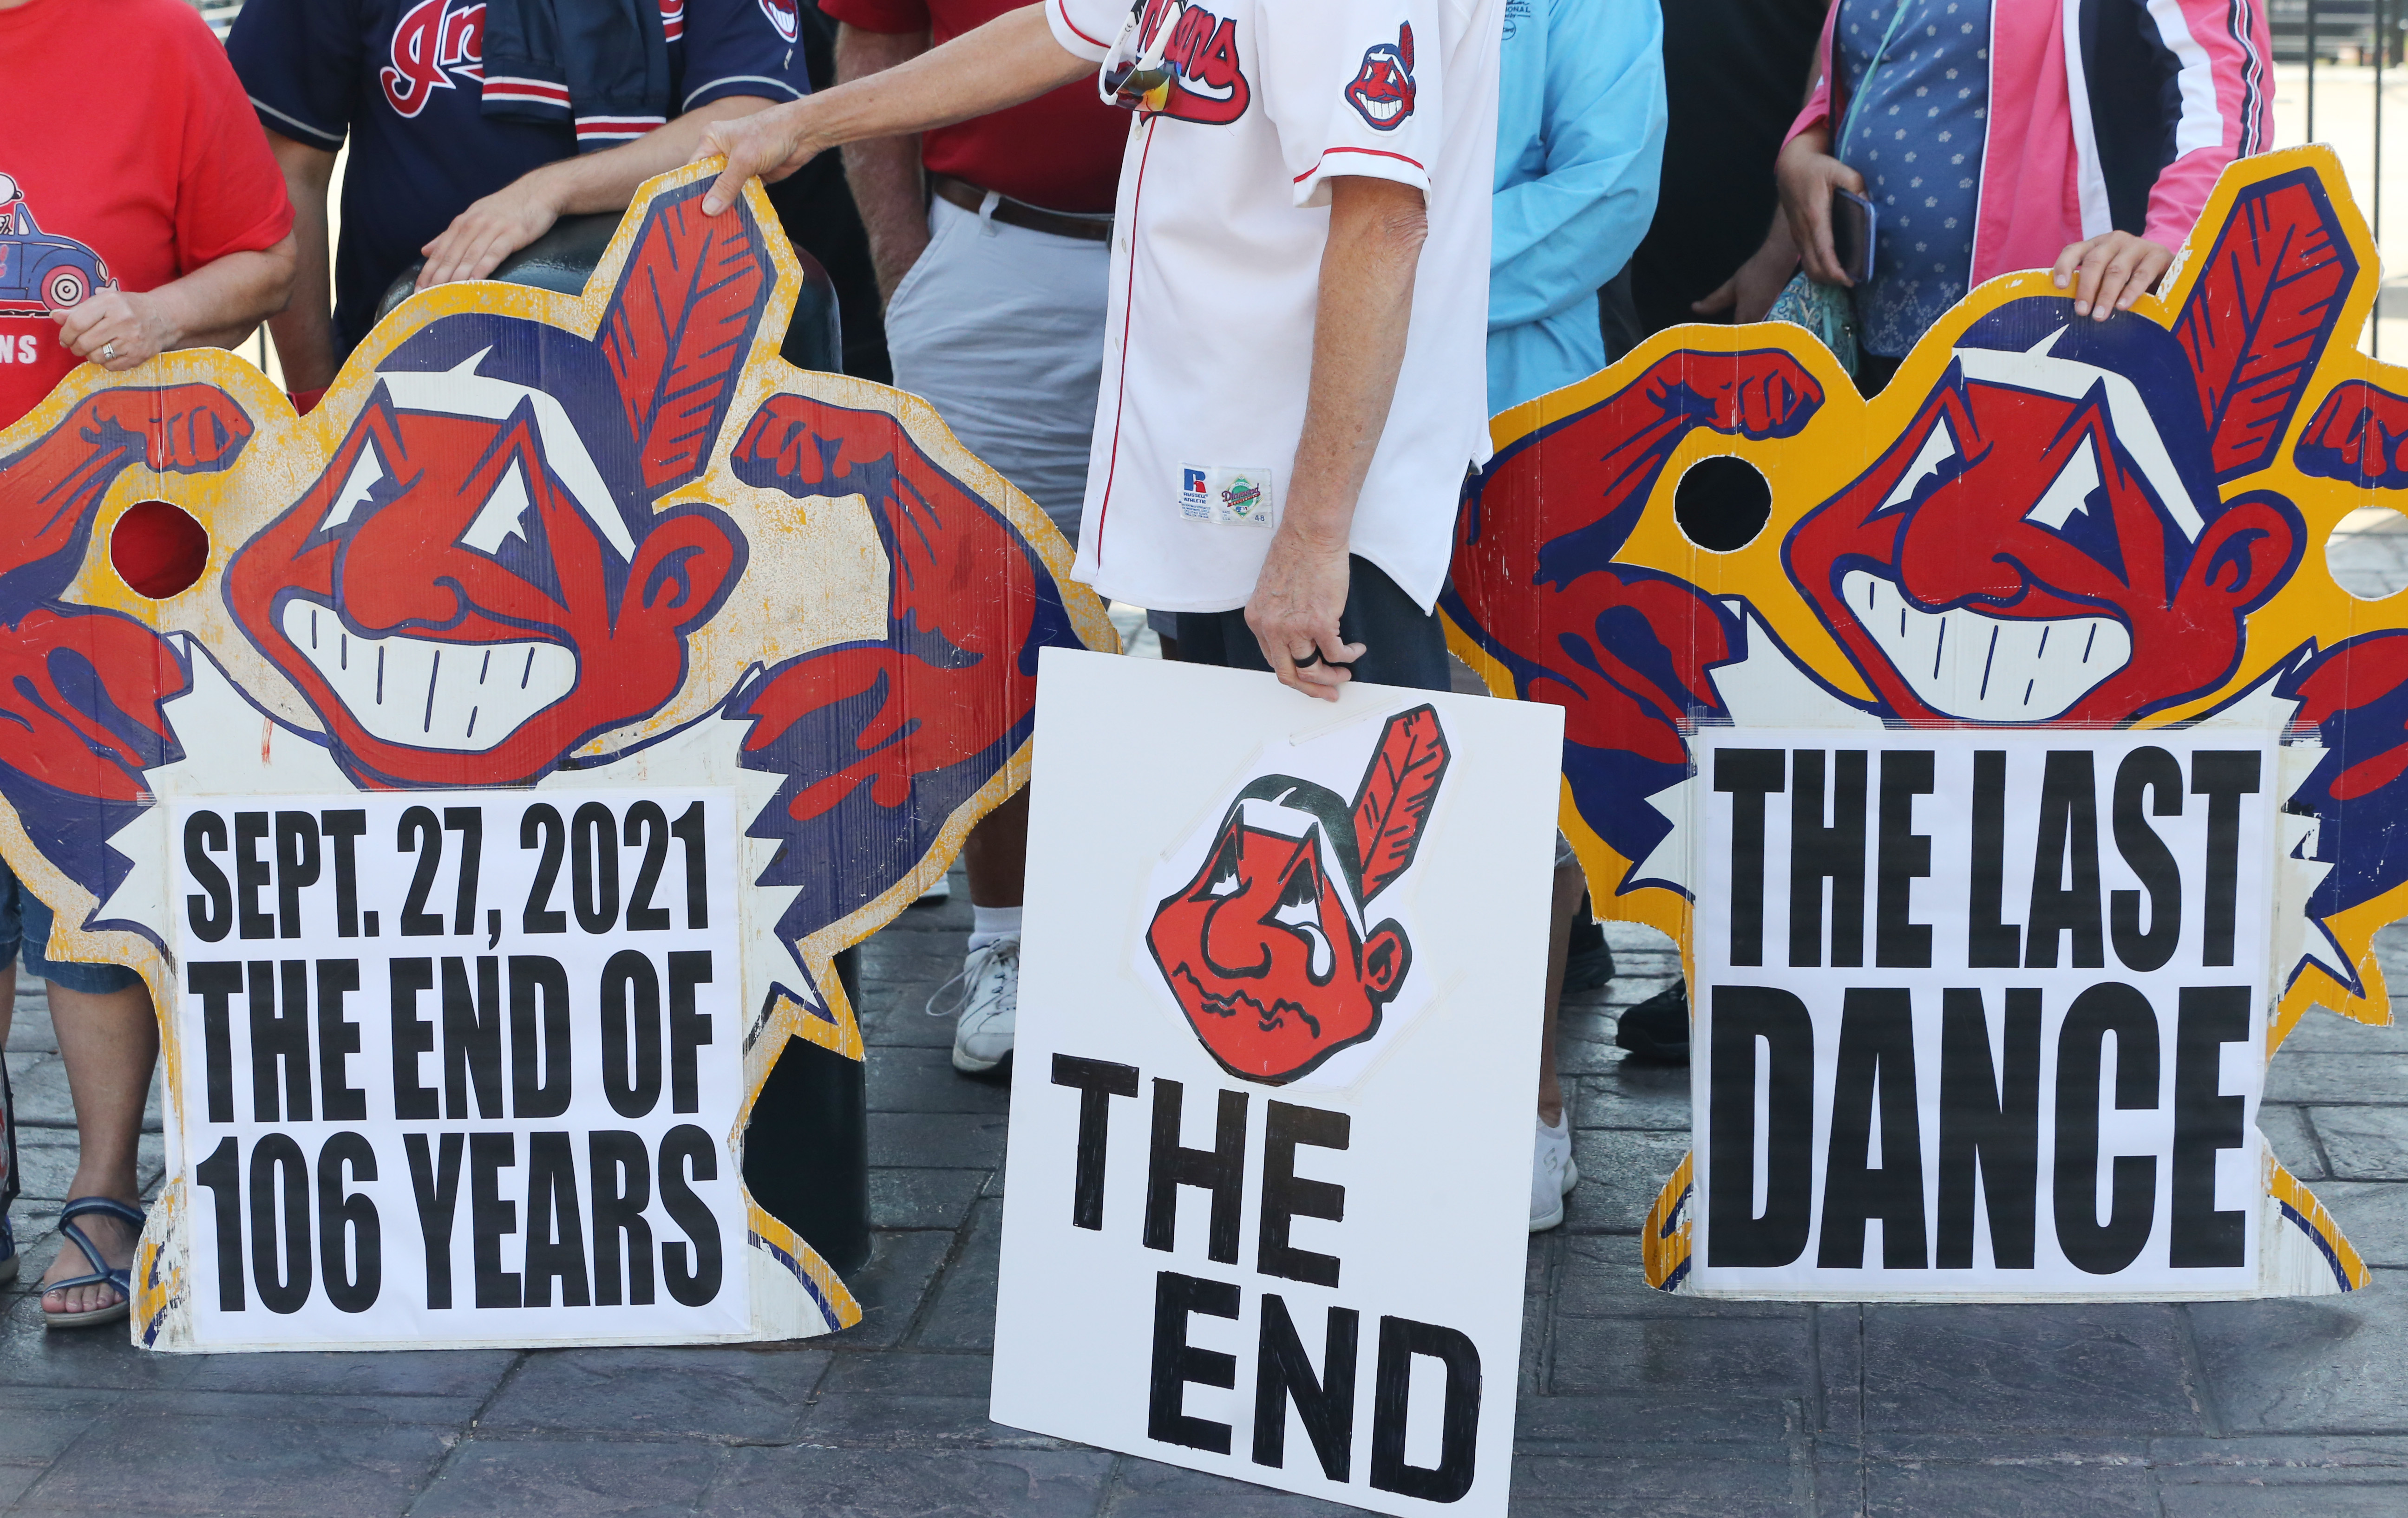 Cleveland baseball fans respond: Is a name change followed by a lockout a  one-two punch? 